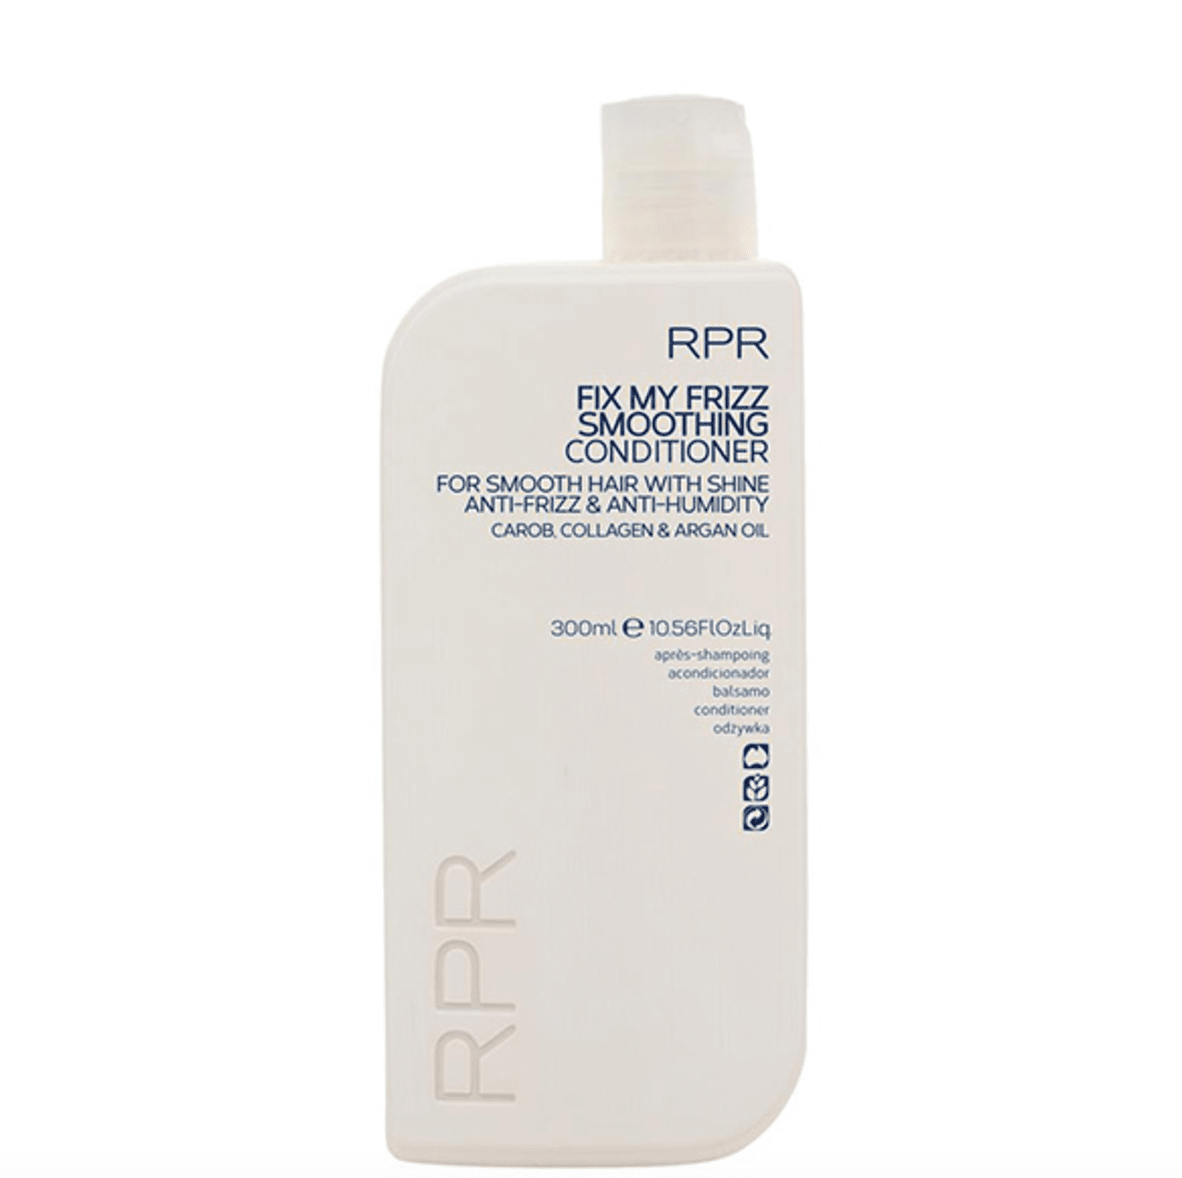 RPR Fix My Frizz Smoothing Conditioner 300ml